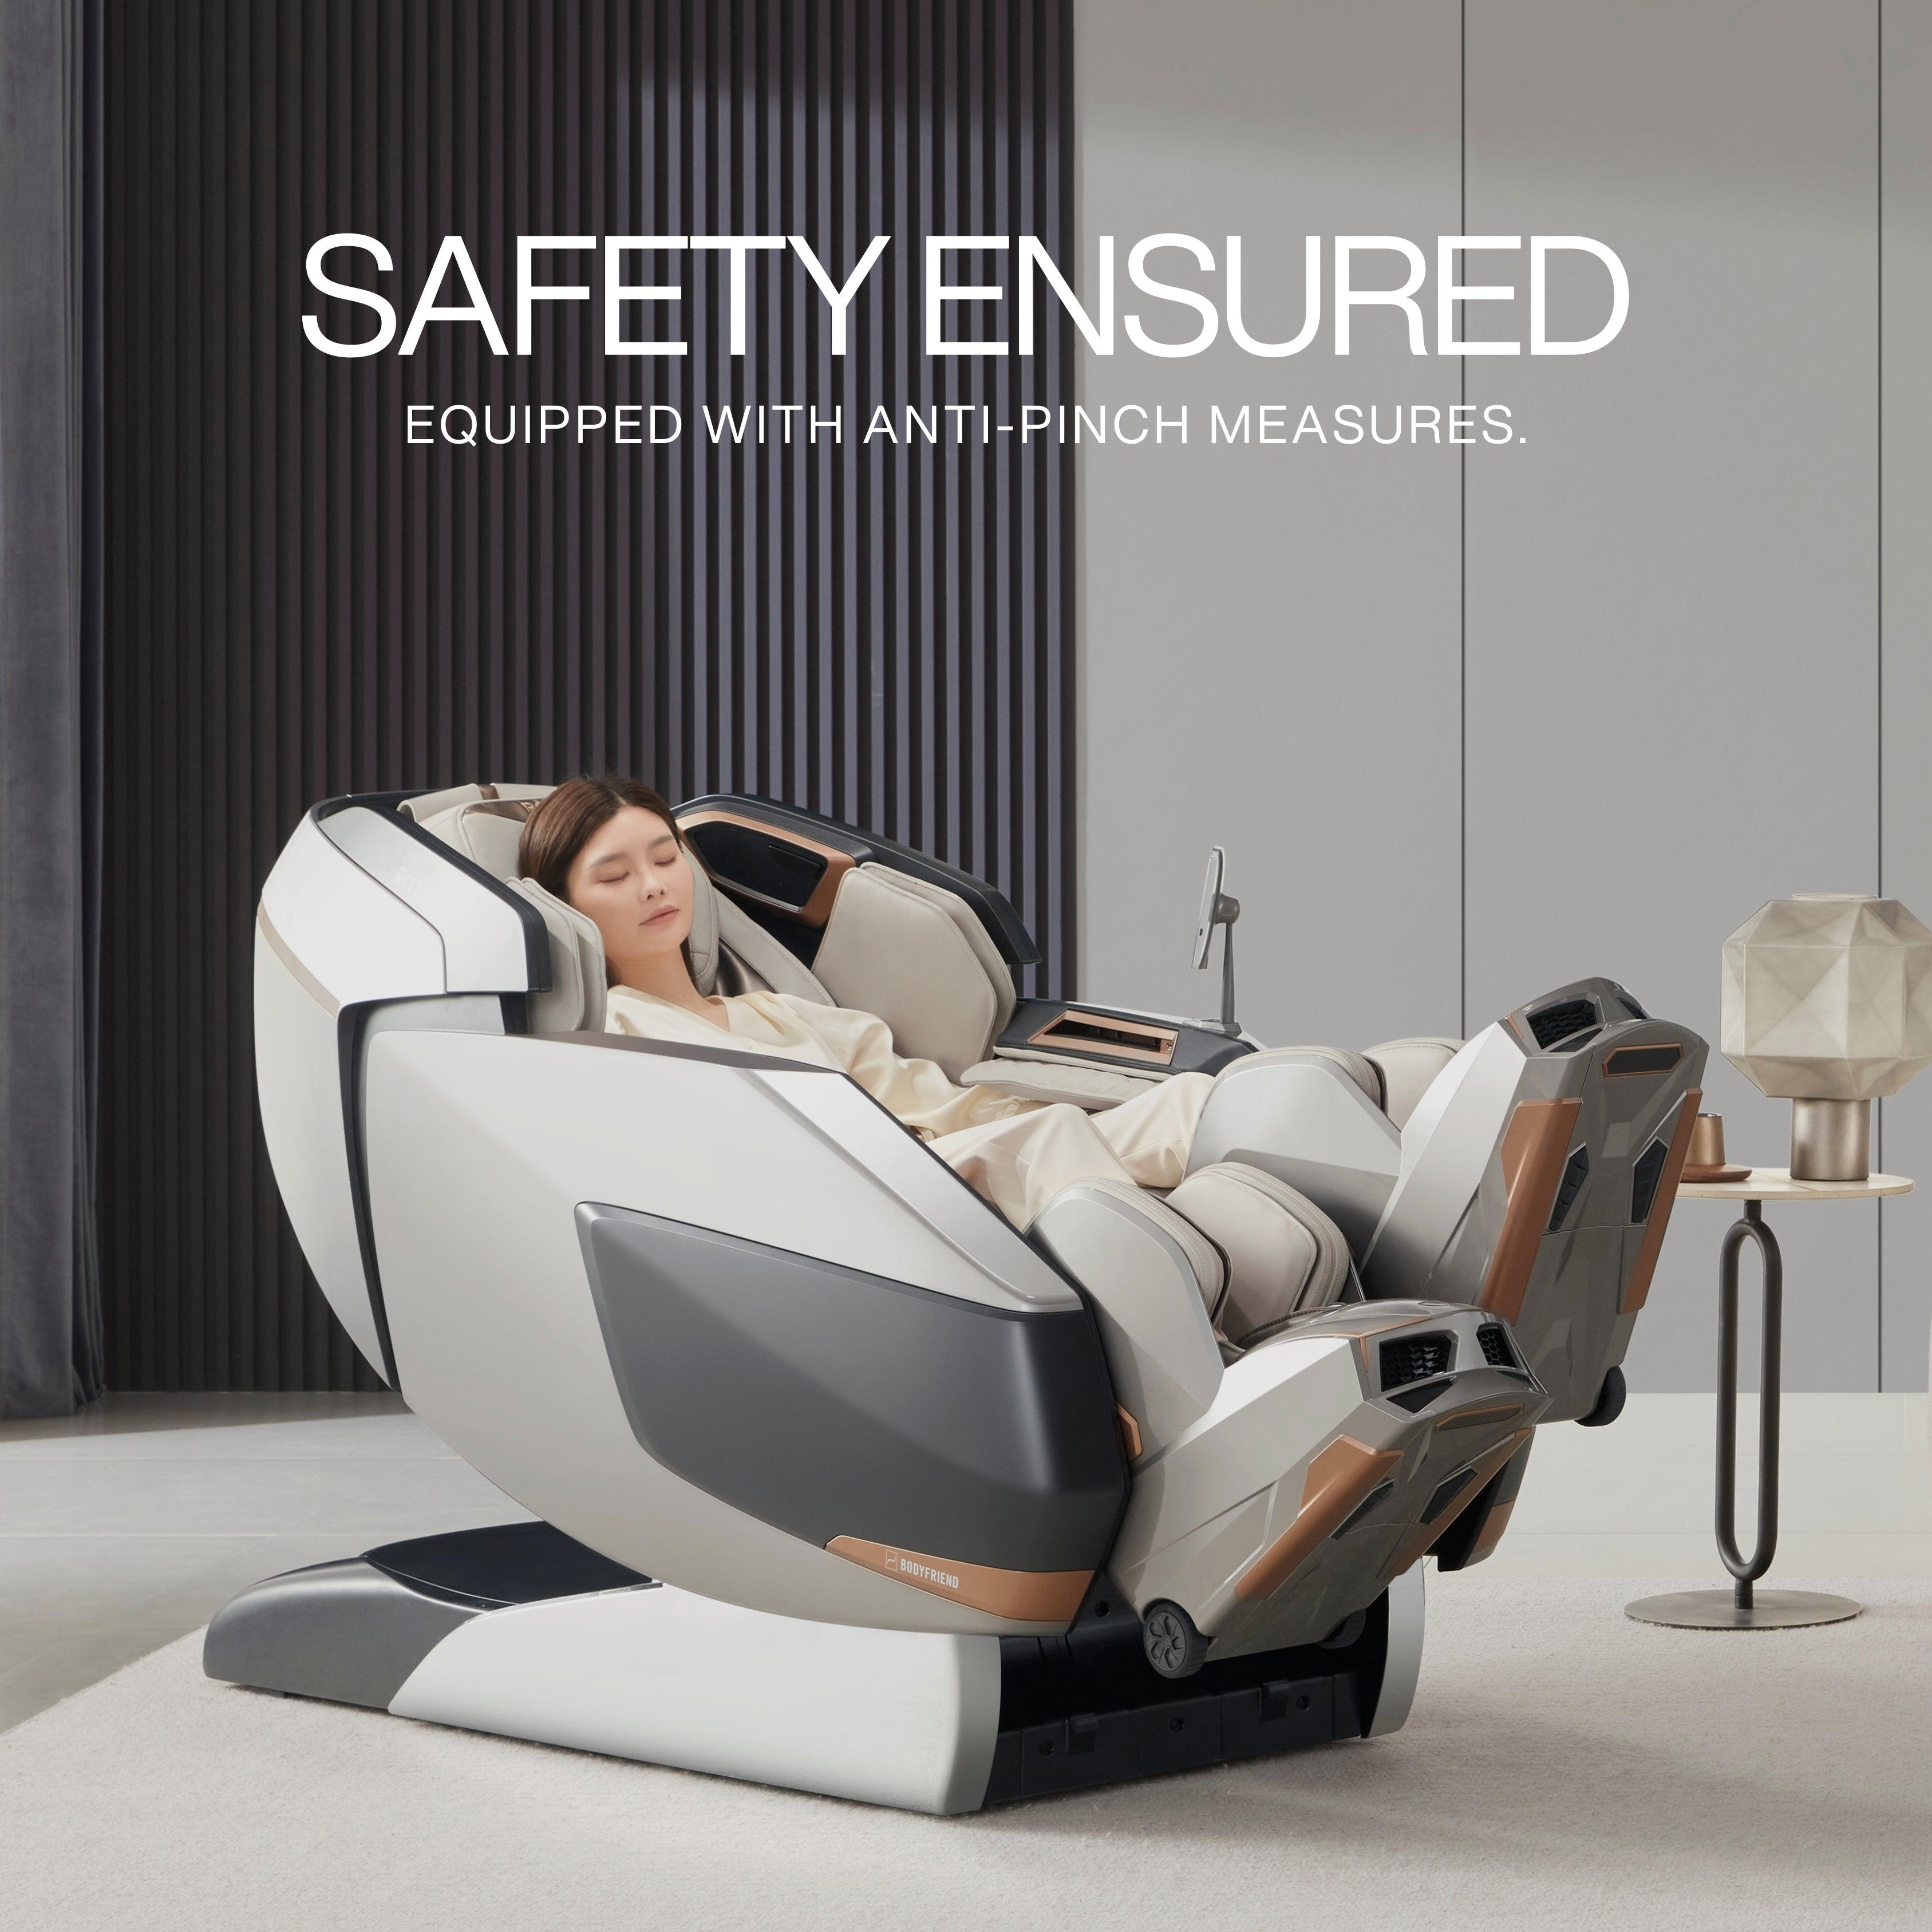 AI robotic massage chair in glacier silver providing a relaxing massage, equipped with anti-pinch safety measures, best massage chair uae, massage chair Dubai, massage chair uae, massage chair Saudi Arabia, كرسي التدليك, Best massage chair in Dubai UAE, b